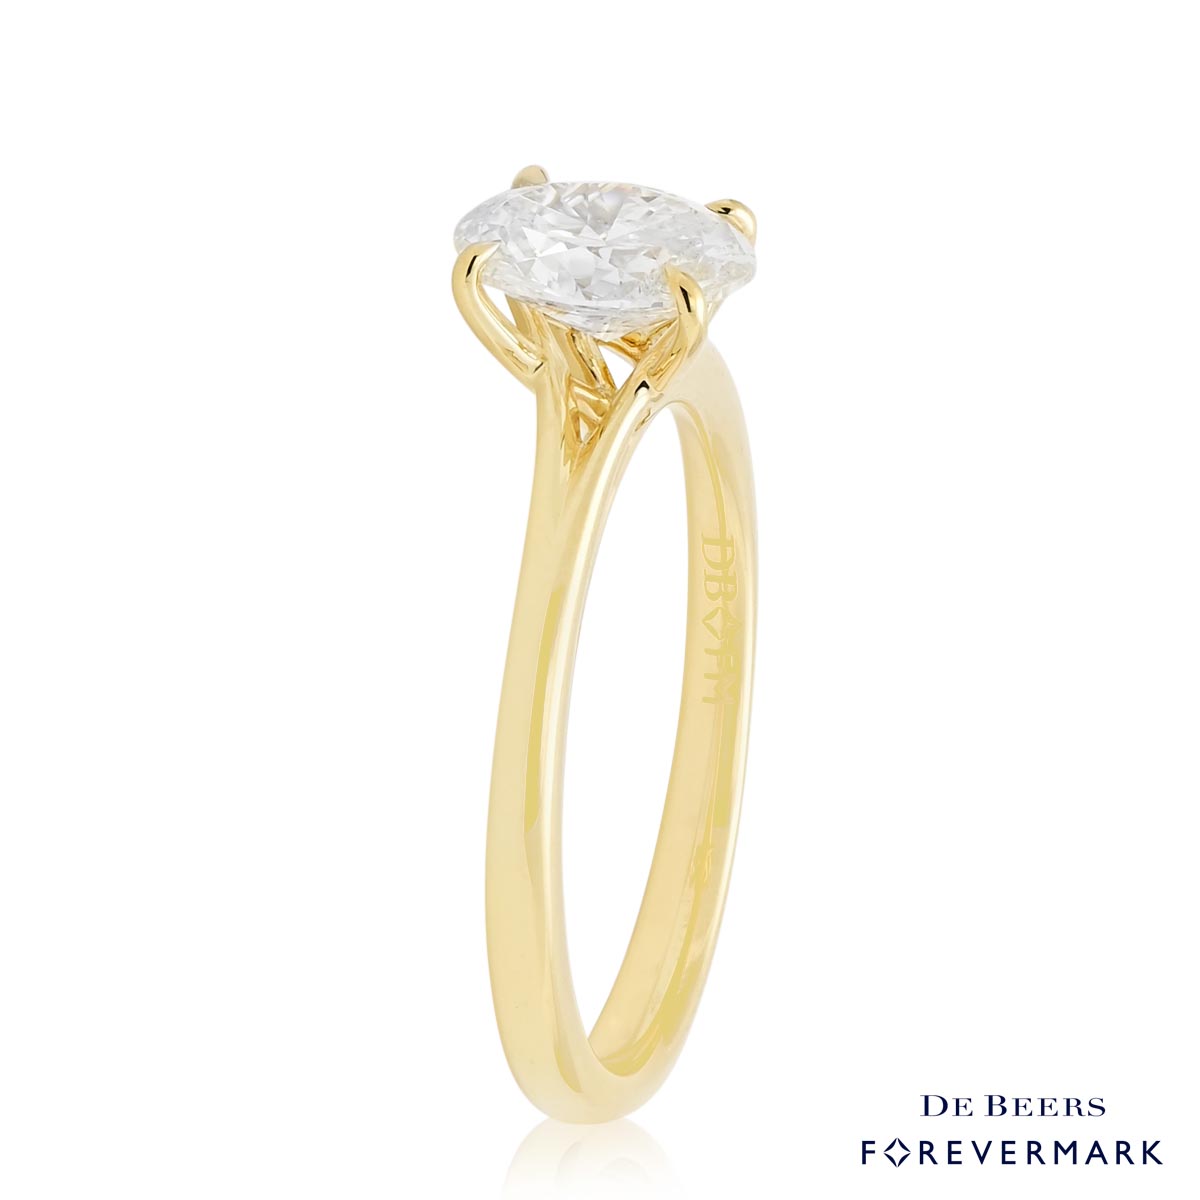 De Beers Forevermark Oval Diamond Icon Setting Engagement Ring in 18kt Yellow Gold (1ct)